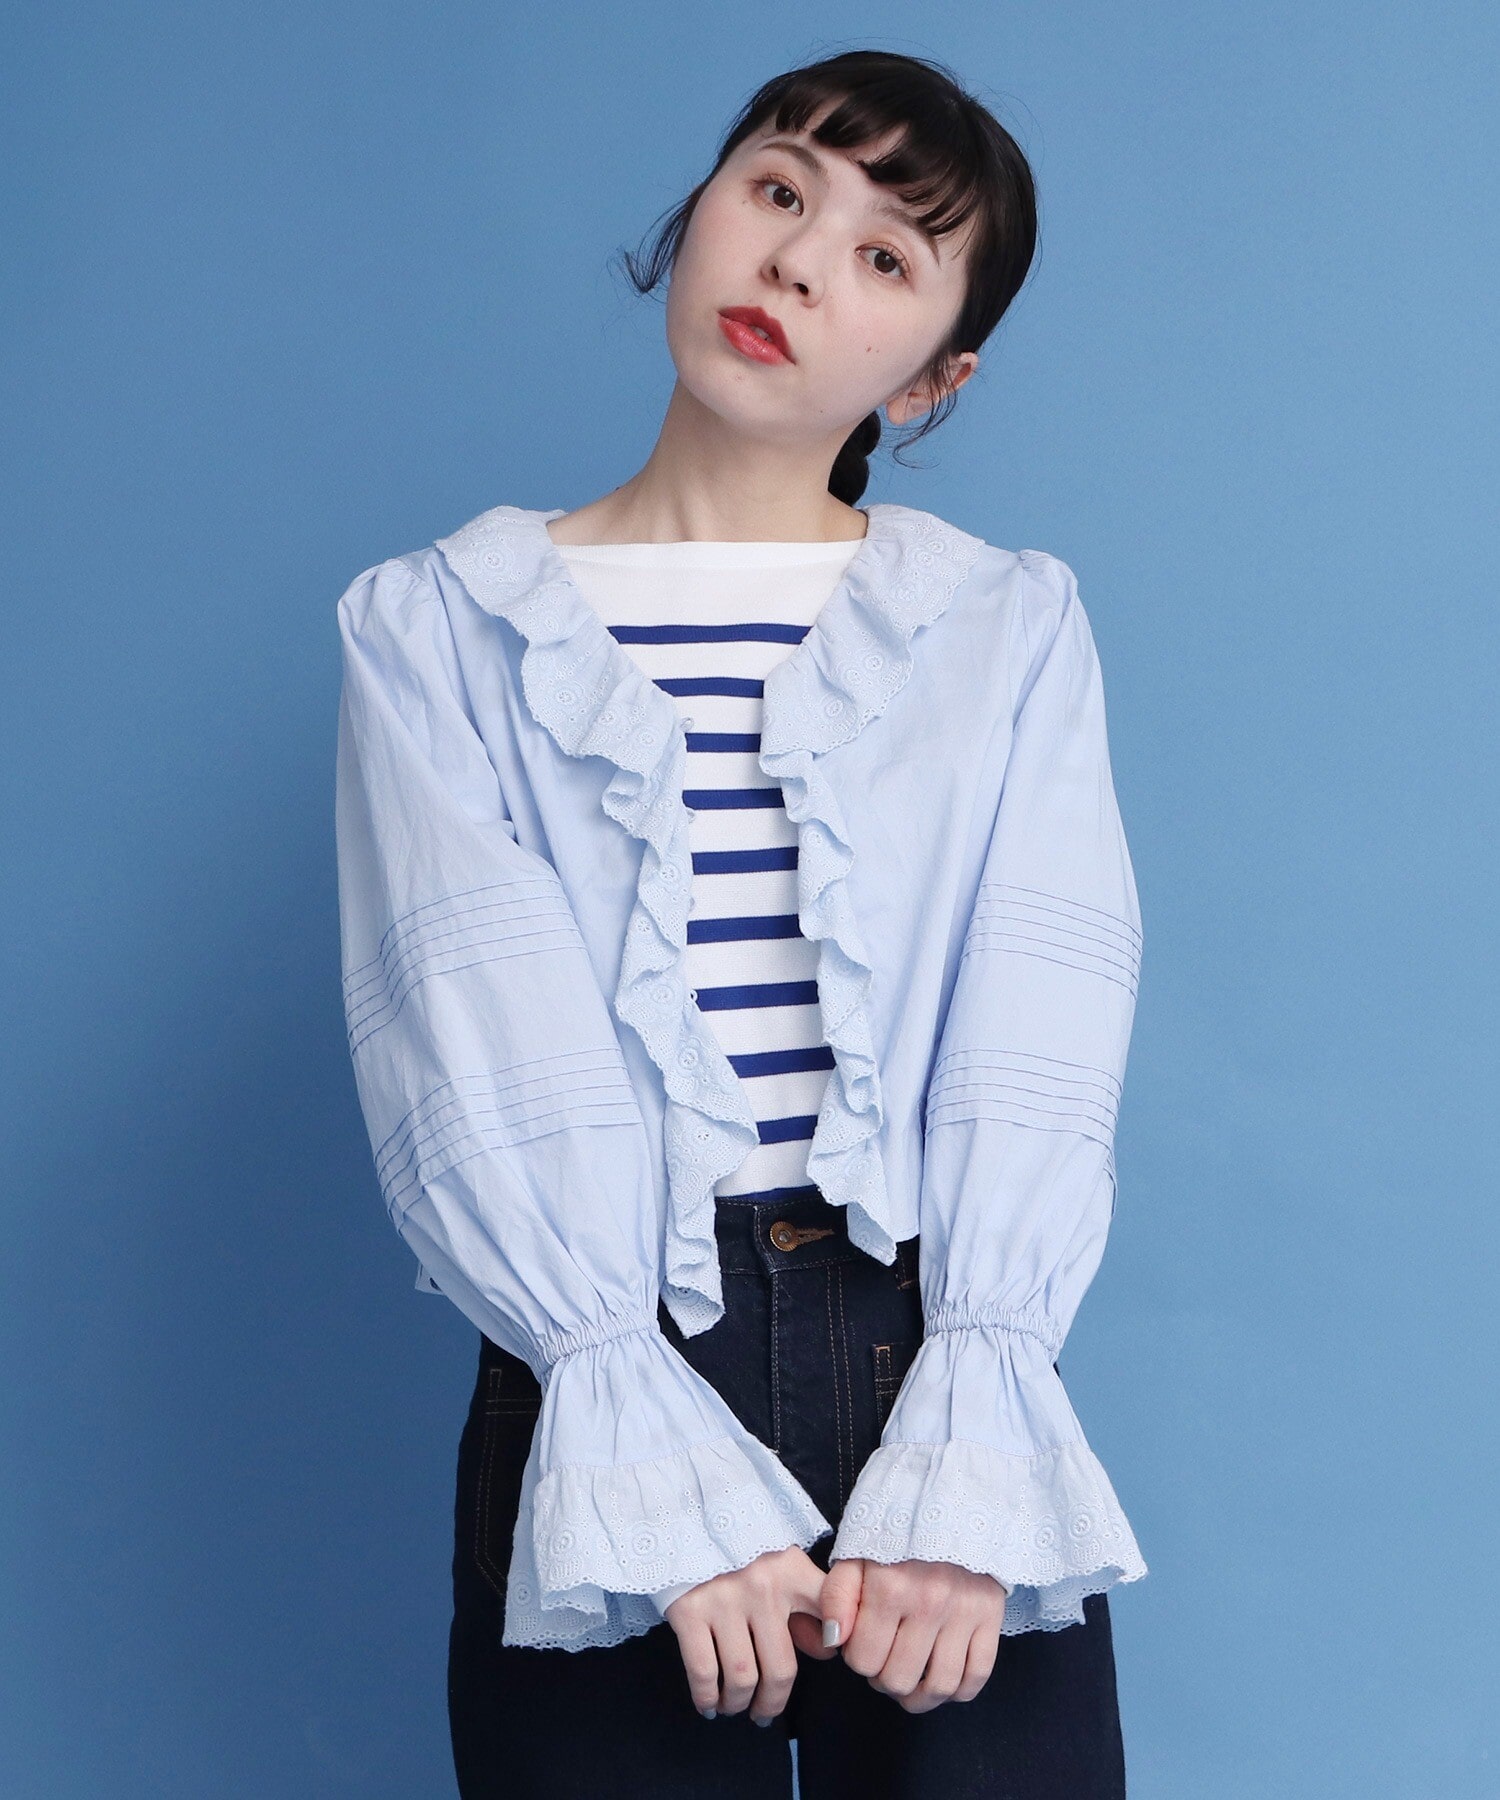 Dot and Stripes CHILD WOMAN ブラウス